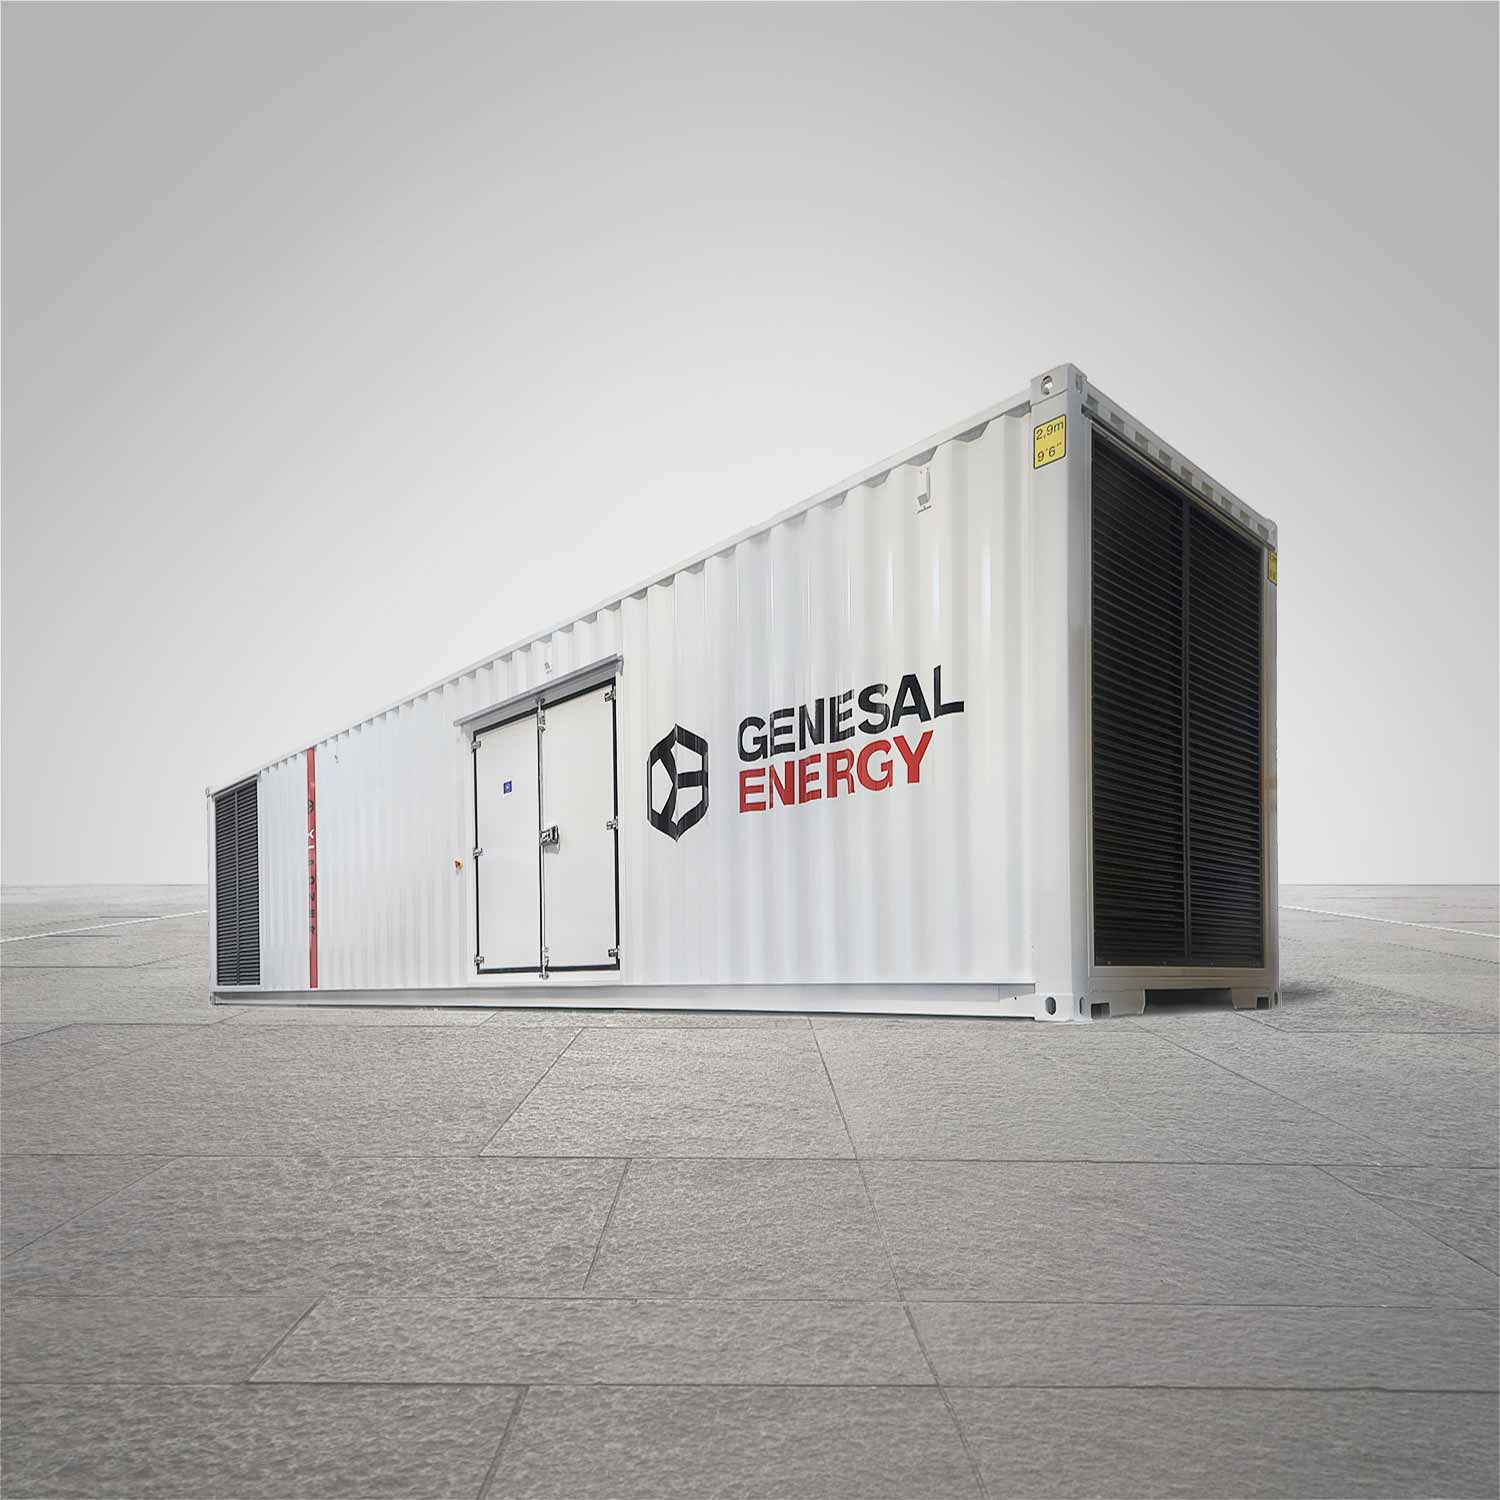 Essential sectors: Genesal Energy supplies emergency power to a large supermarket chain